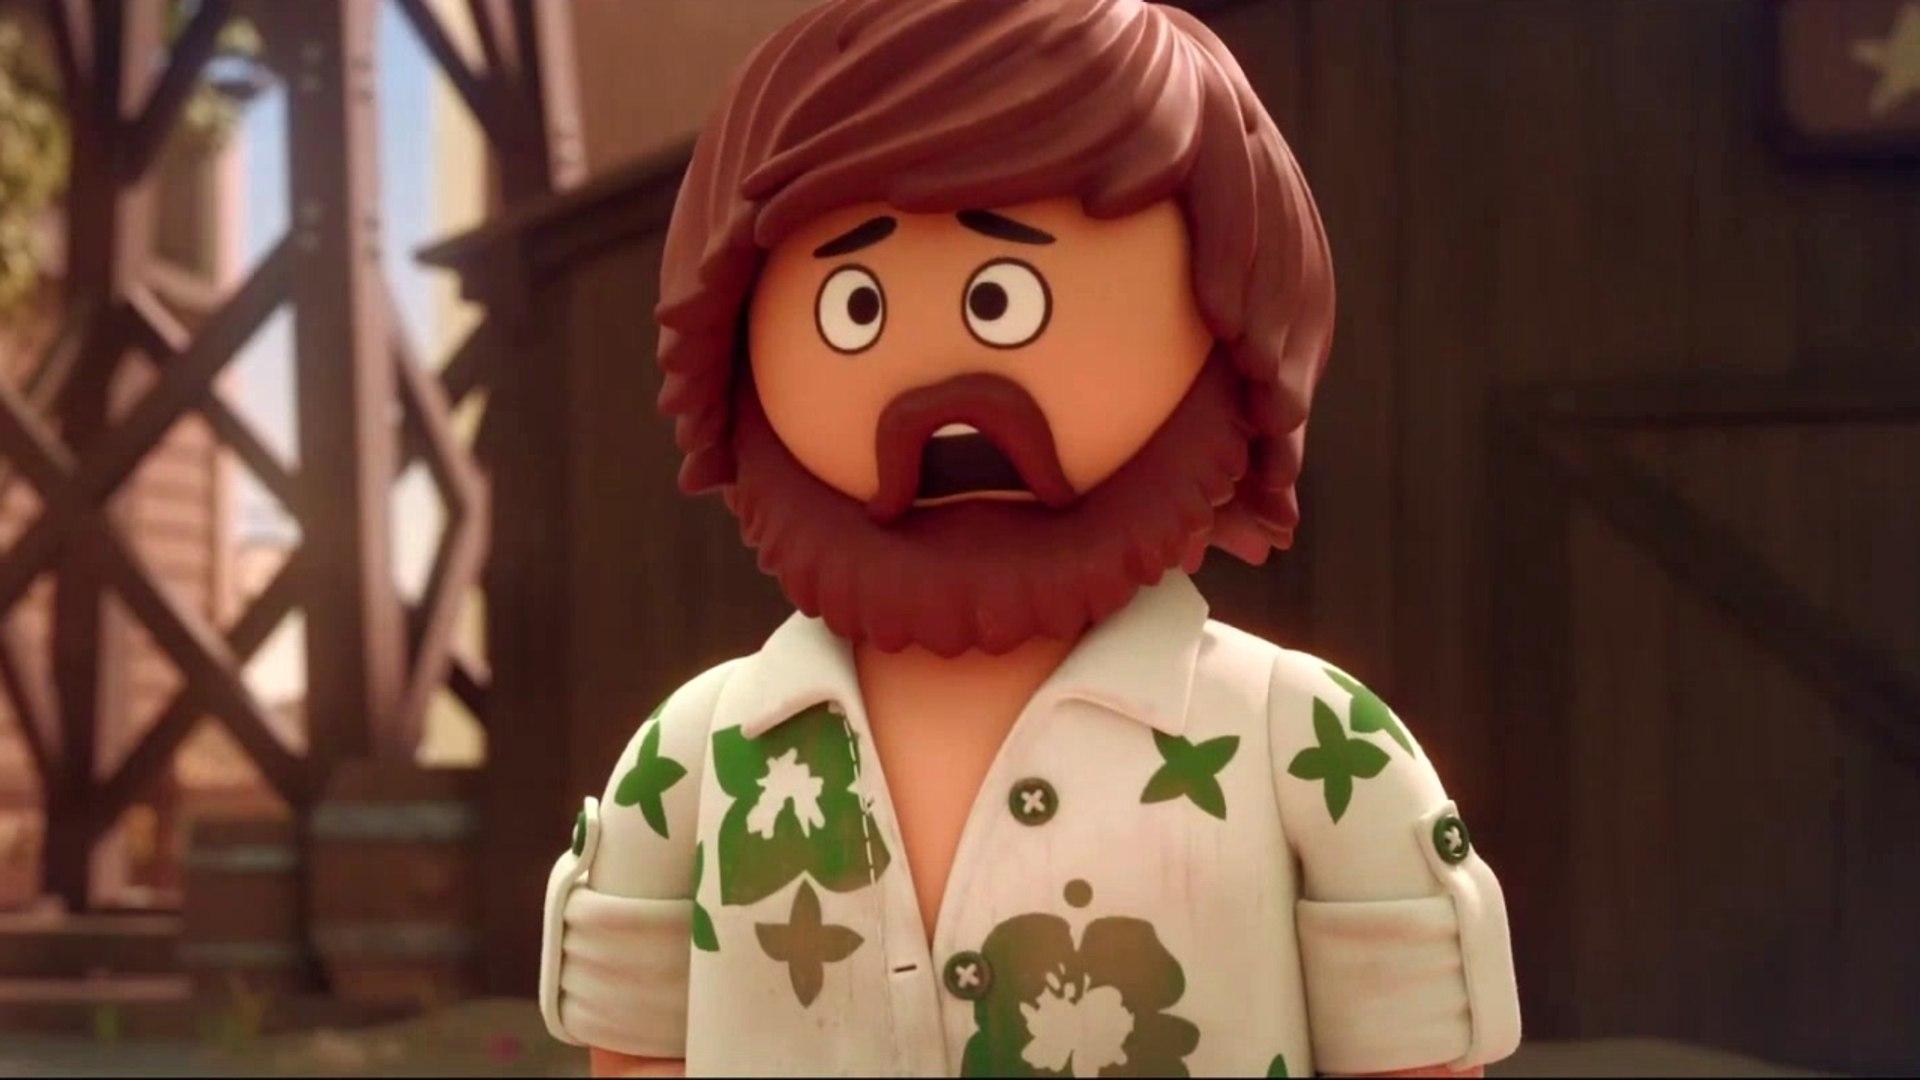 Playmobil: The Movie (Clean Trailer)